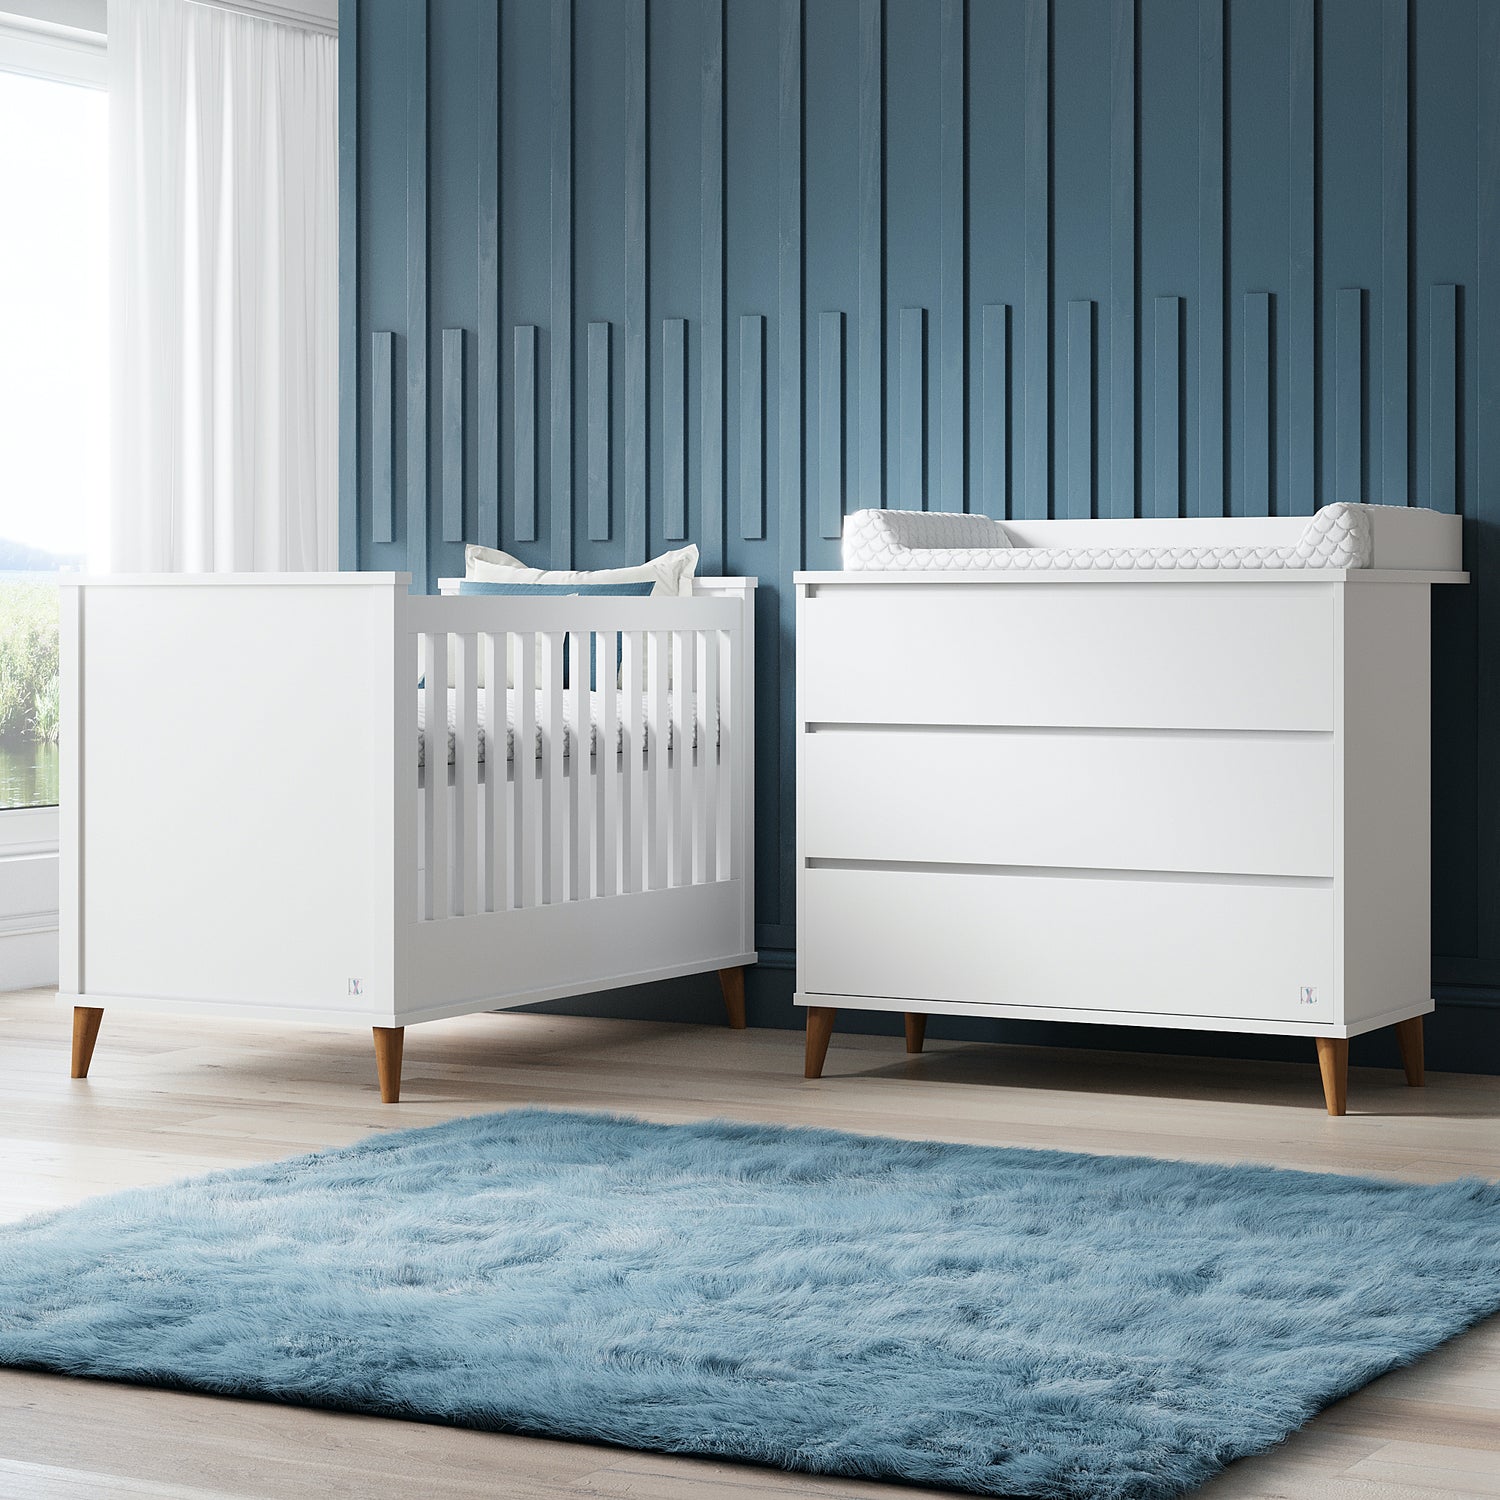 Baby bed NORDIC in snow white with chest of drawers | LUI e LEI - Interiors | convertible 4 in 1 baby bed 70x140 white